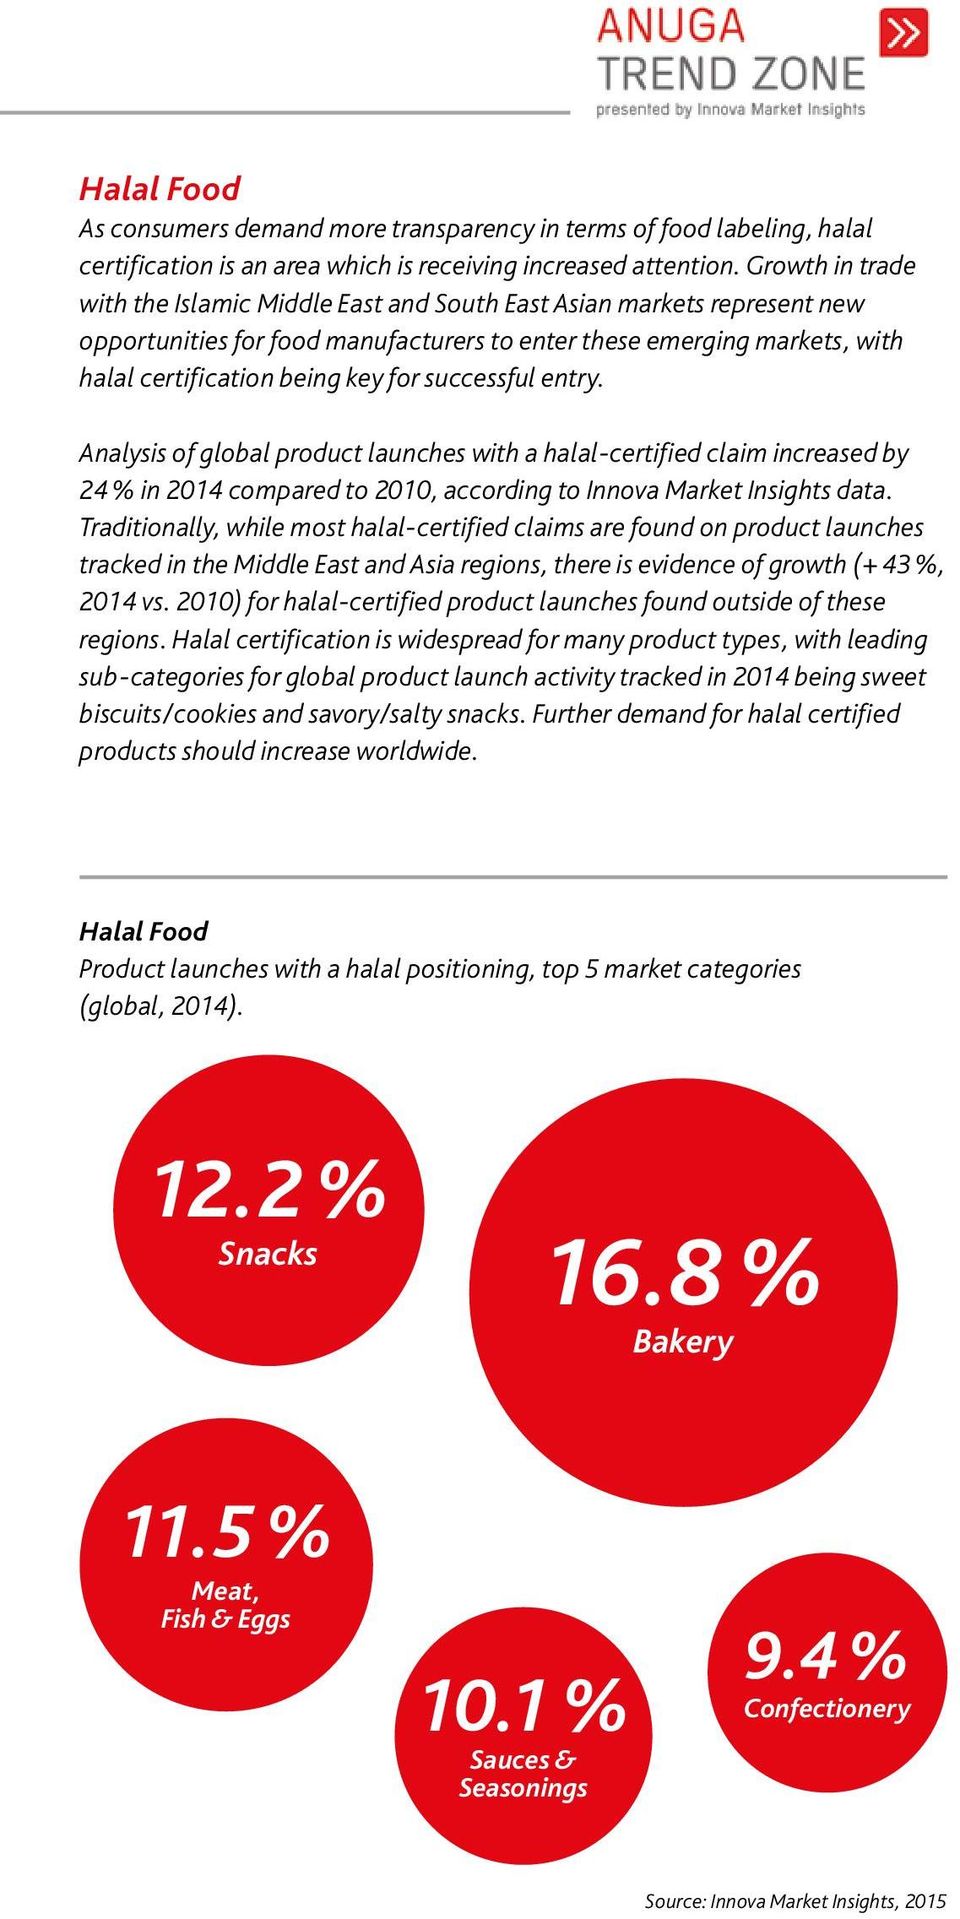 successful entry. Analysis of global product launches with a halal-certified claim increased by 24 % in 2014 compared to 2010, according to Innova Market Insights data.